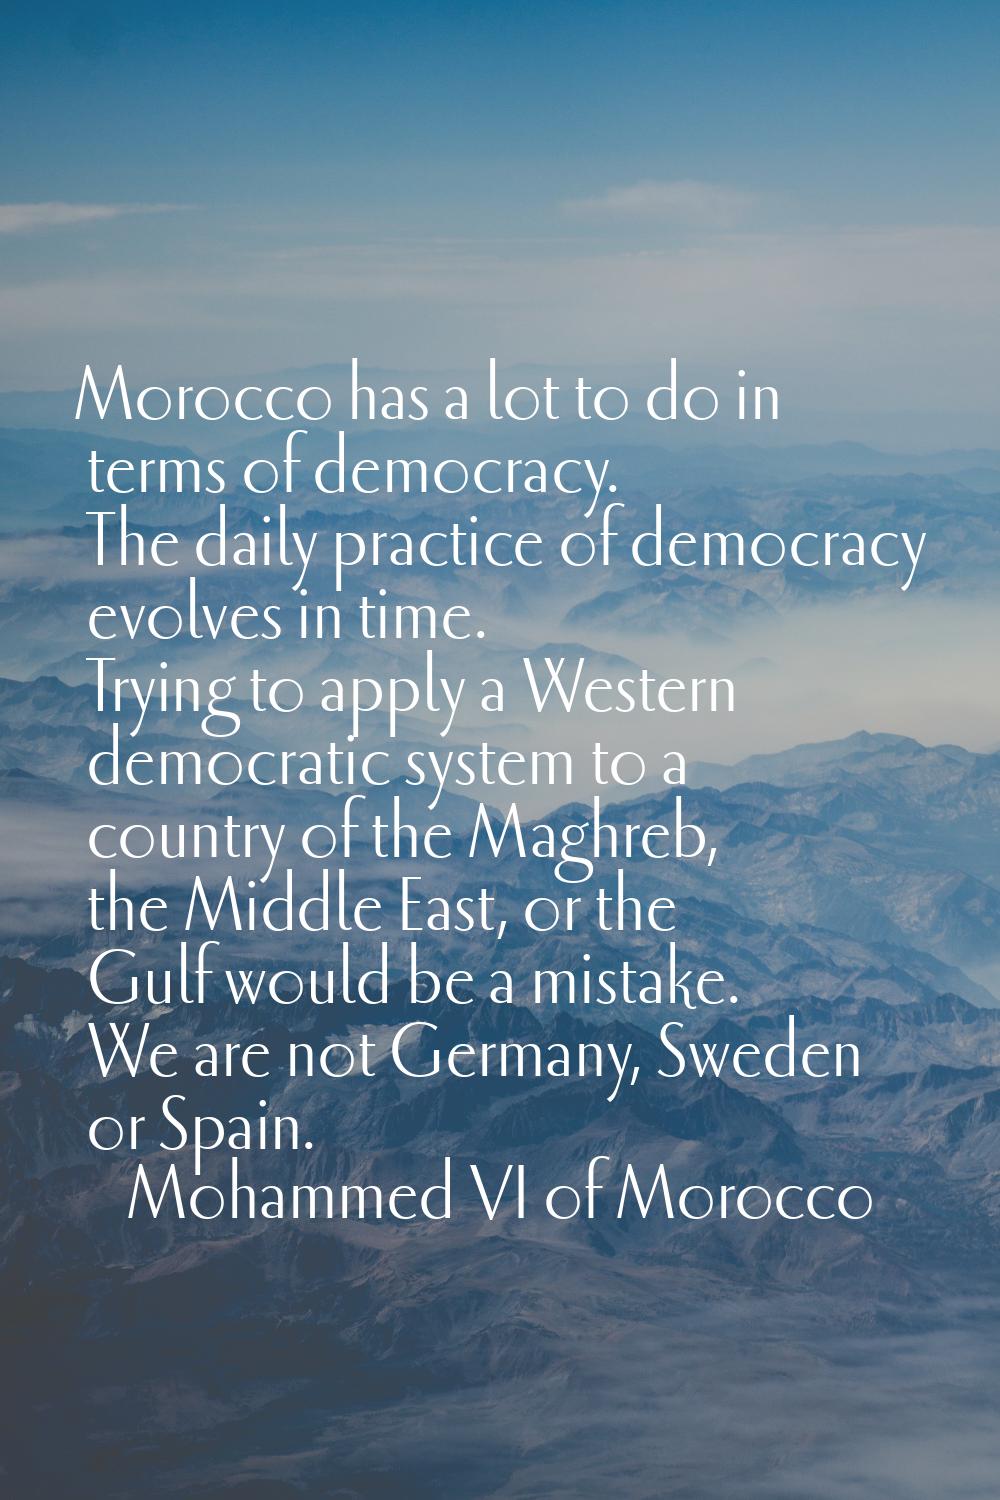 Morocco has a lot to do in terms of democracy. The daily practice of democracy evolves in time. Try